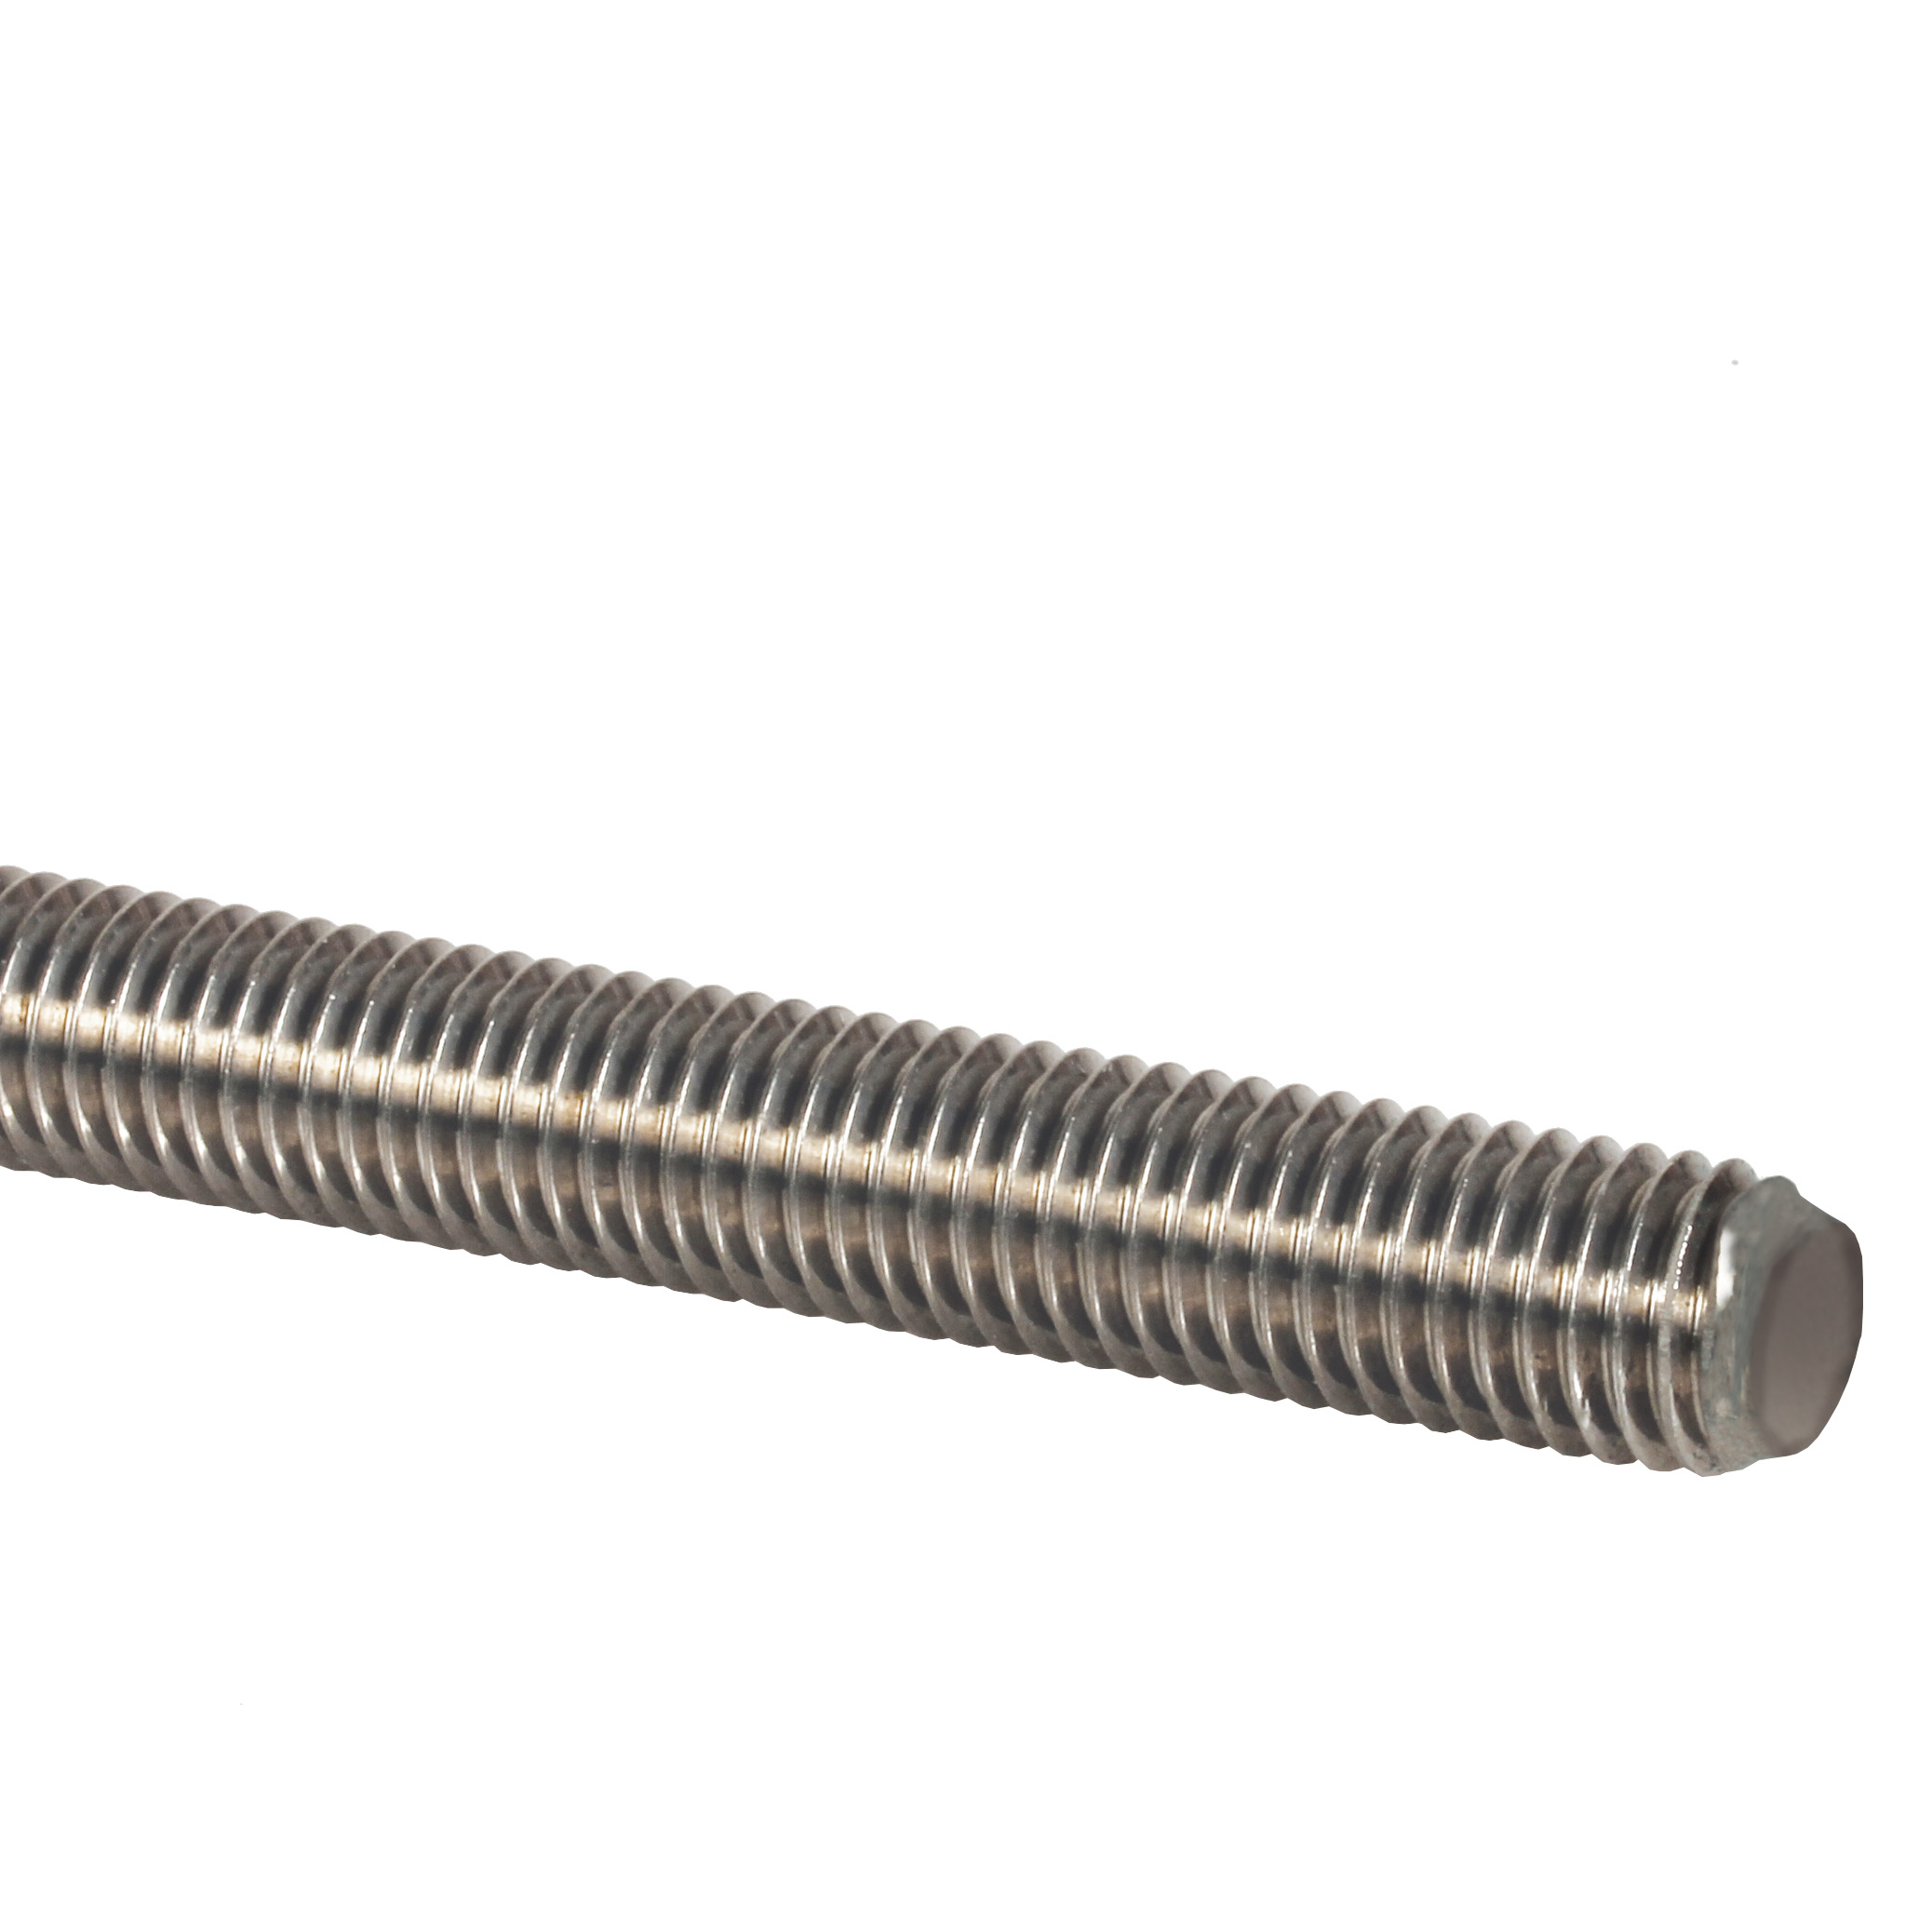 Threaded rod - DIN 975 - Stainless steel  A2 -  - 